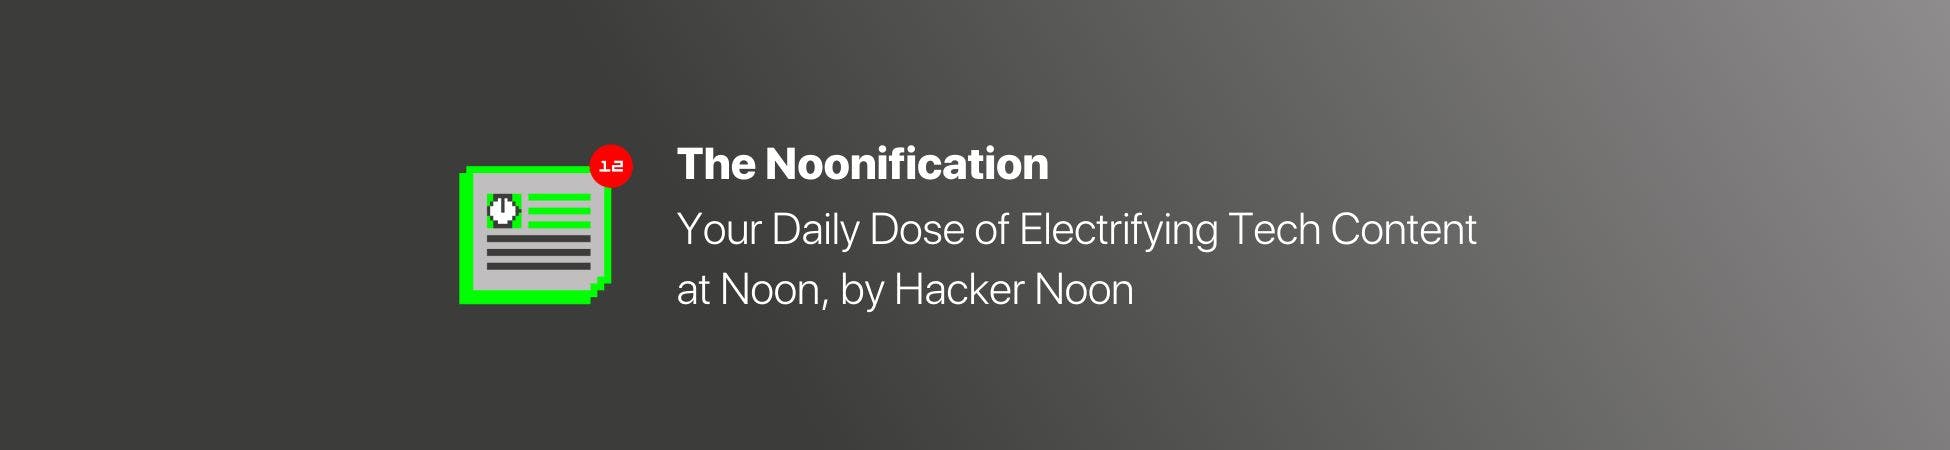 featured image - Noonification: Your Daily Dose of Electrifying Tech Content at Noon, by Hacker Noon